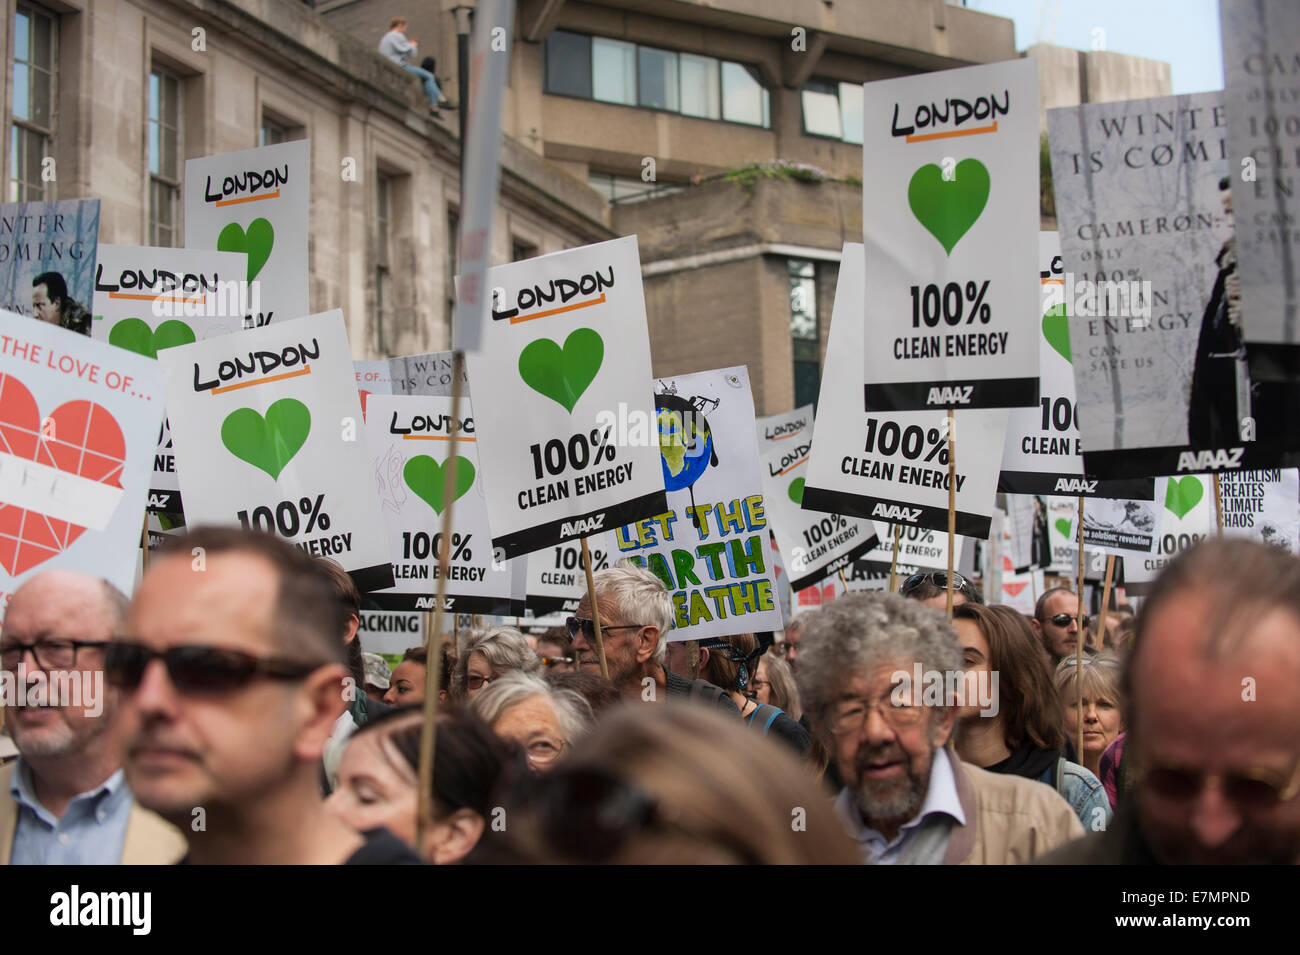 London, UK. 21st Sep, 2014. A forest of placards is held aloft at the Climate Change demonstration, London, 21st September 2014. Credit:  Sue Cunningham Photographic/Alamy Live News Stock Photo